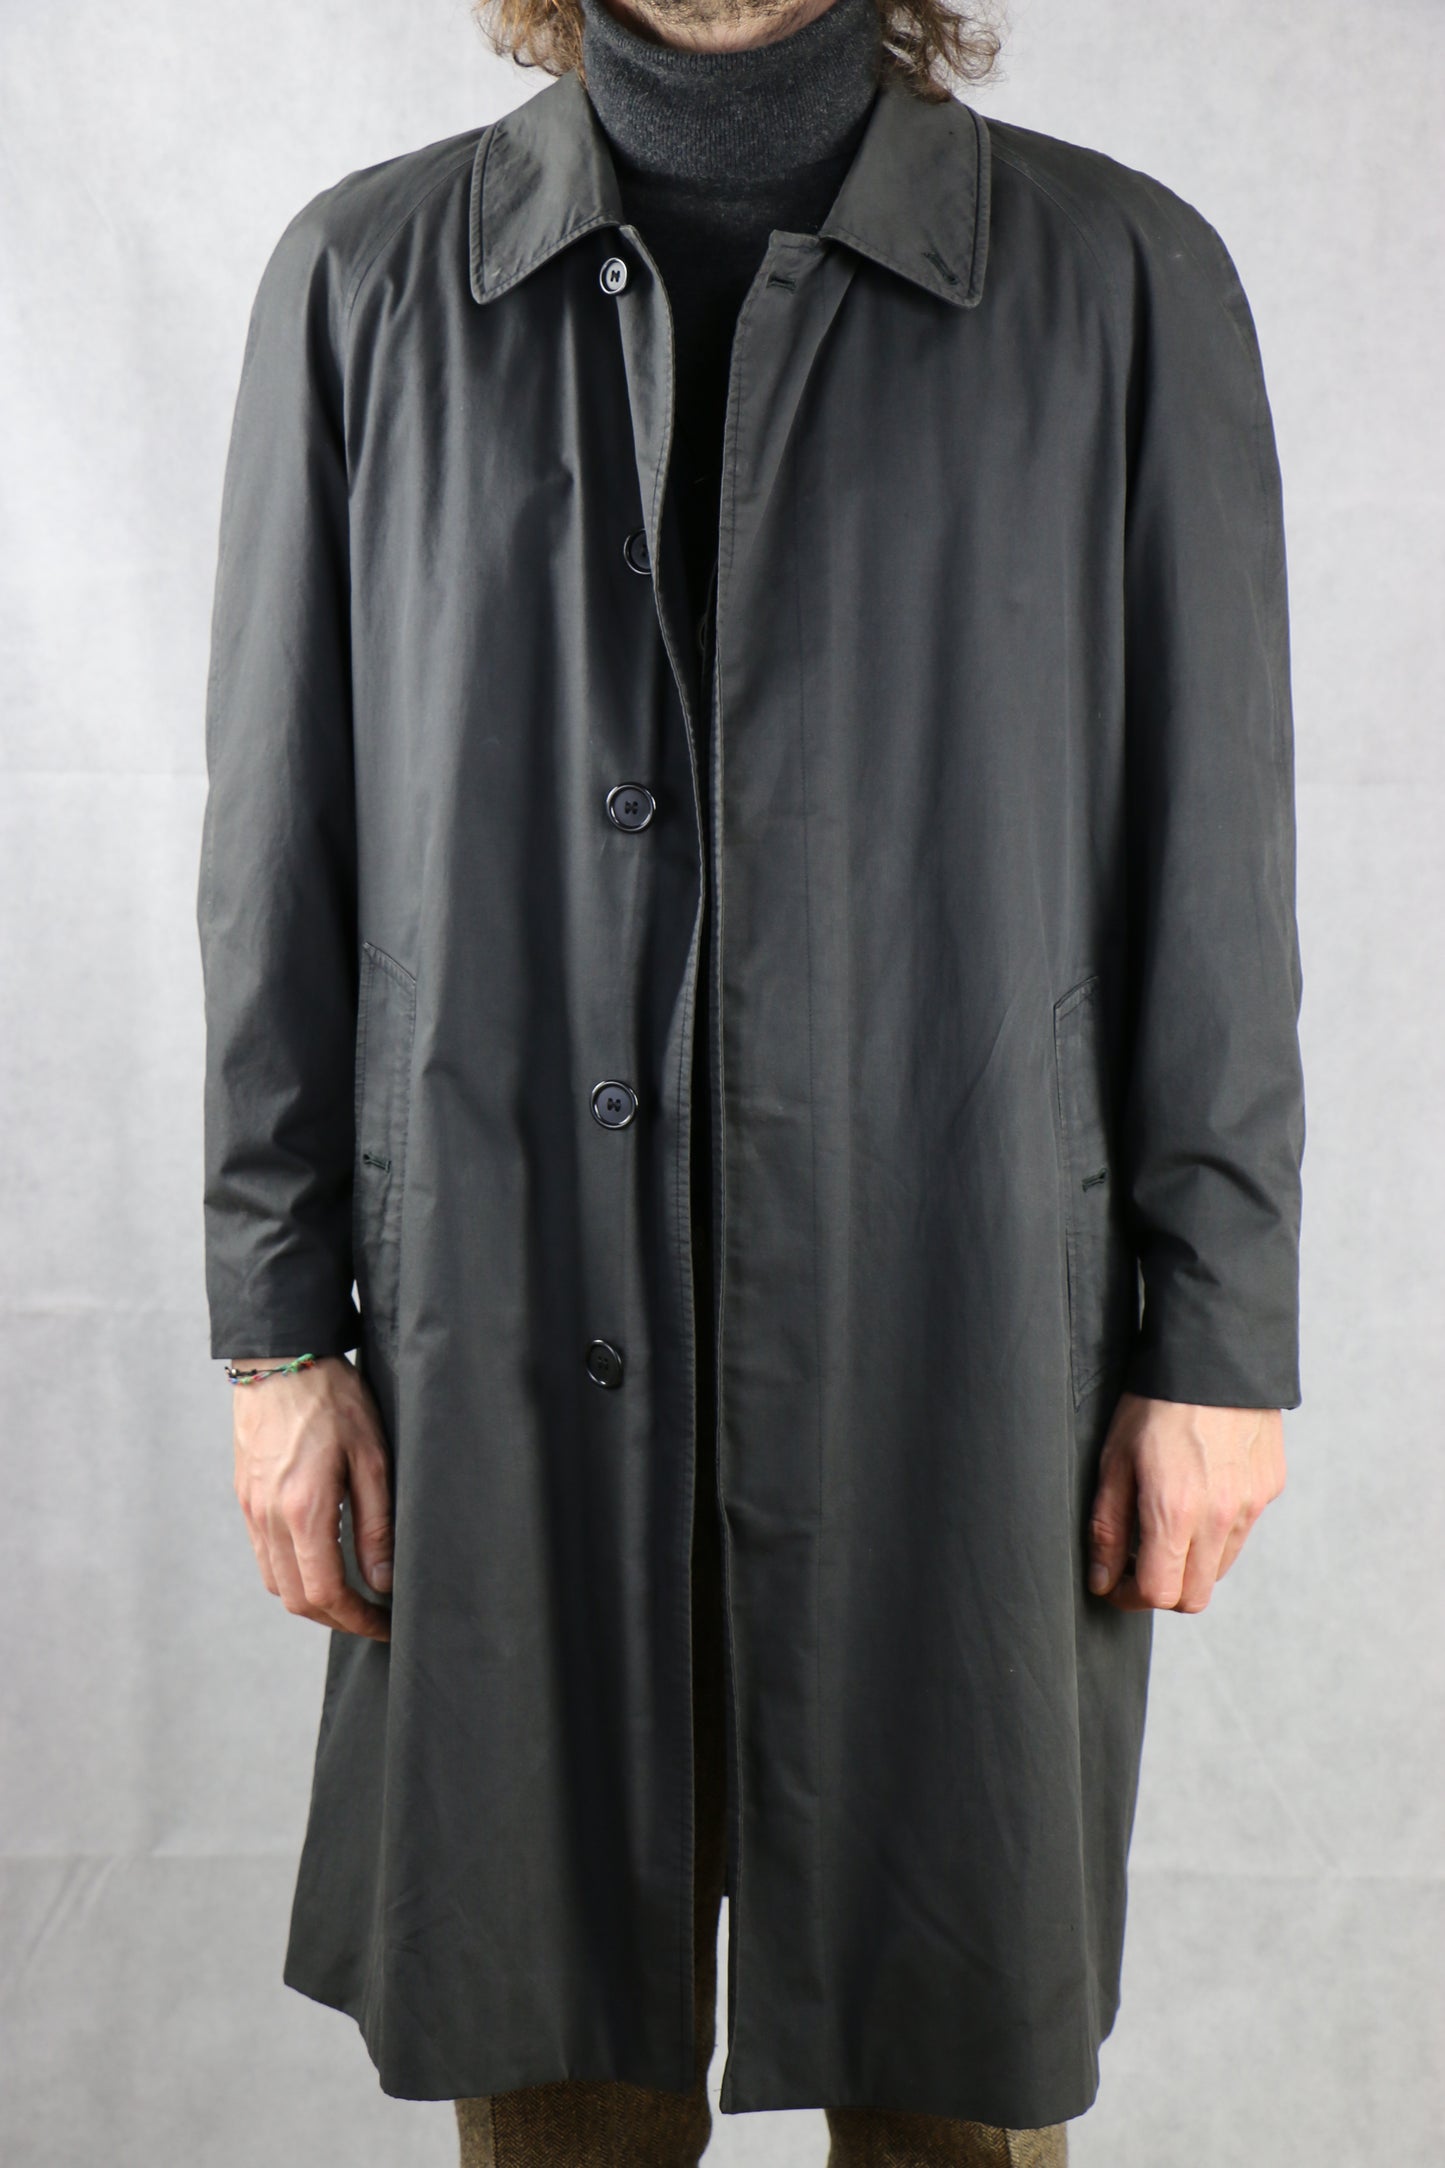 Burberrys' Cotton Trench Coat Made in England, clochard92.com